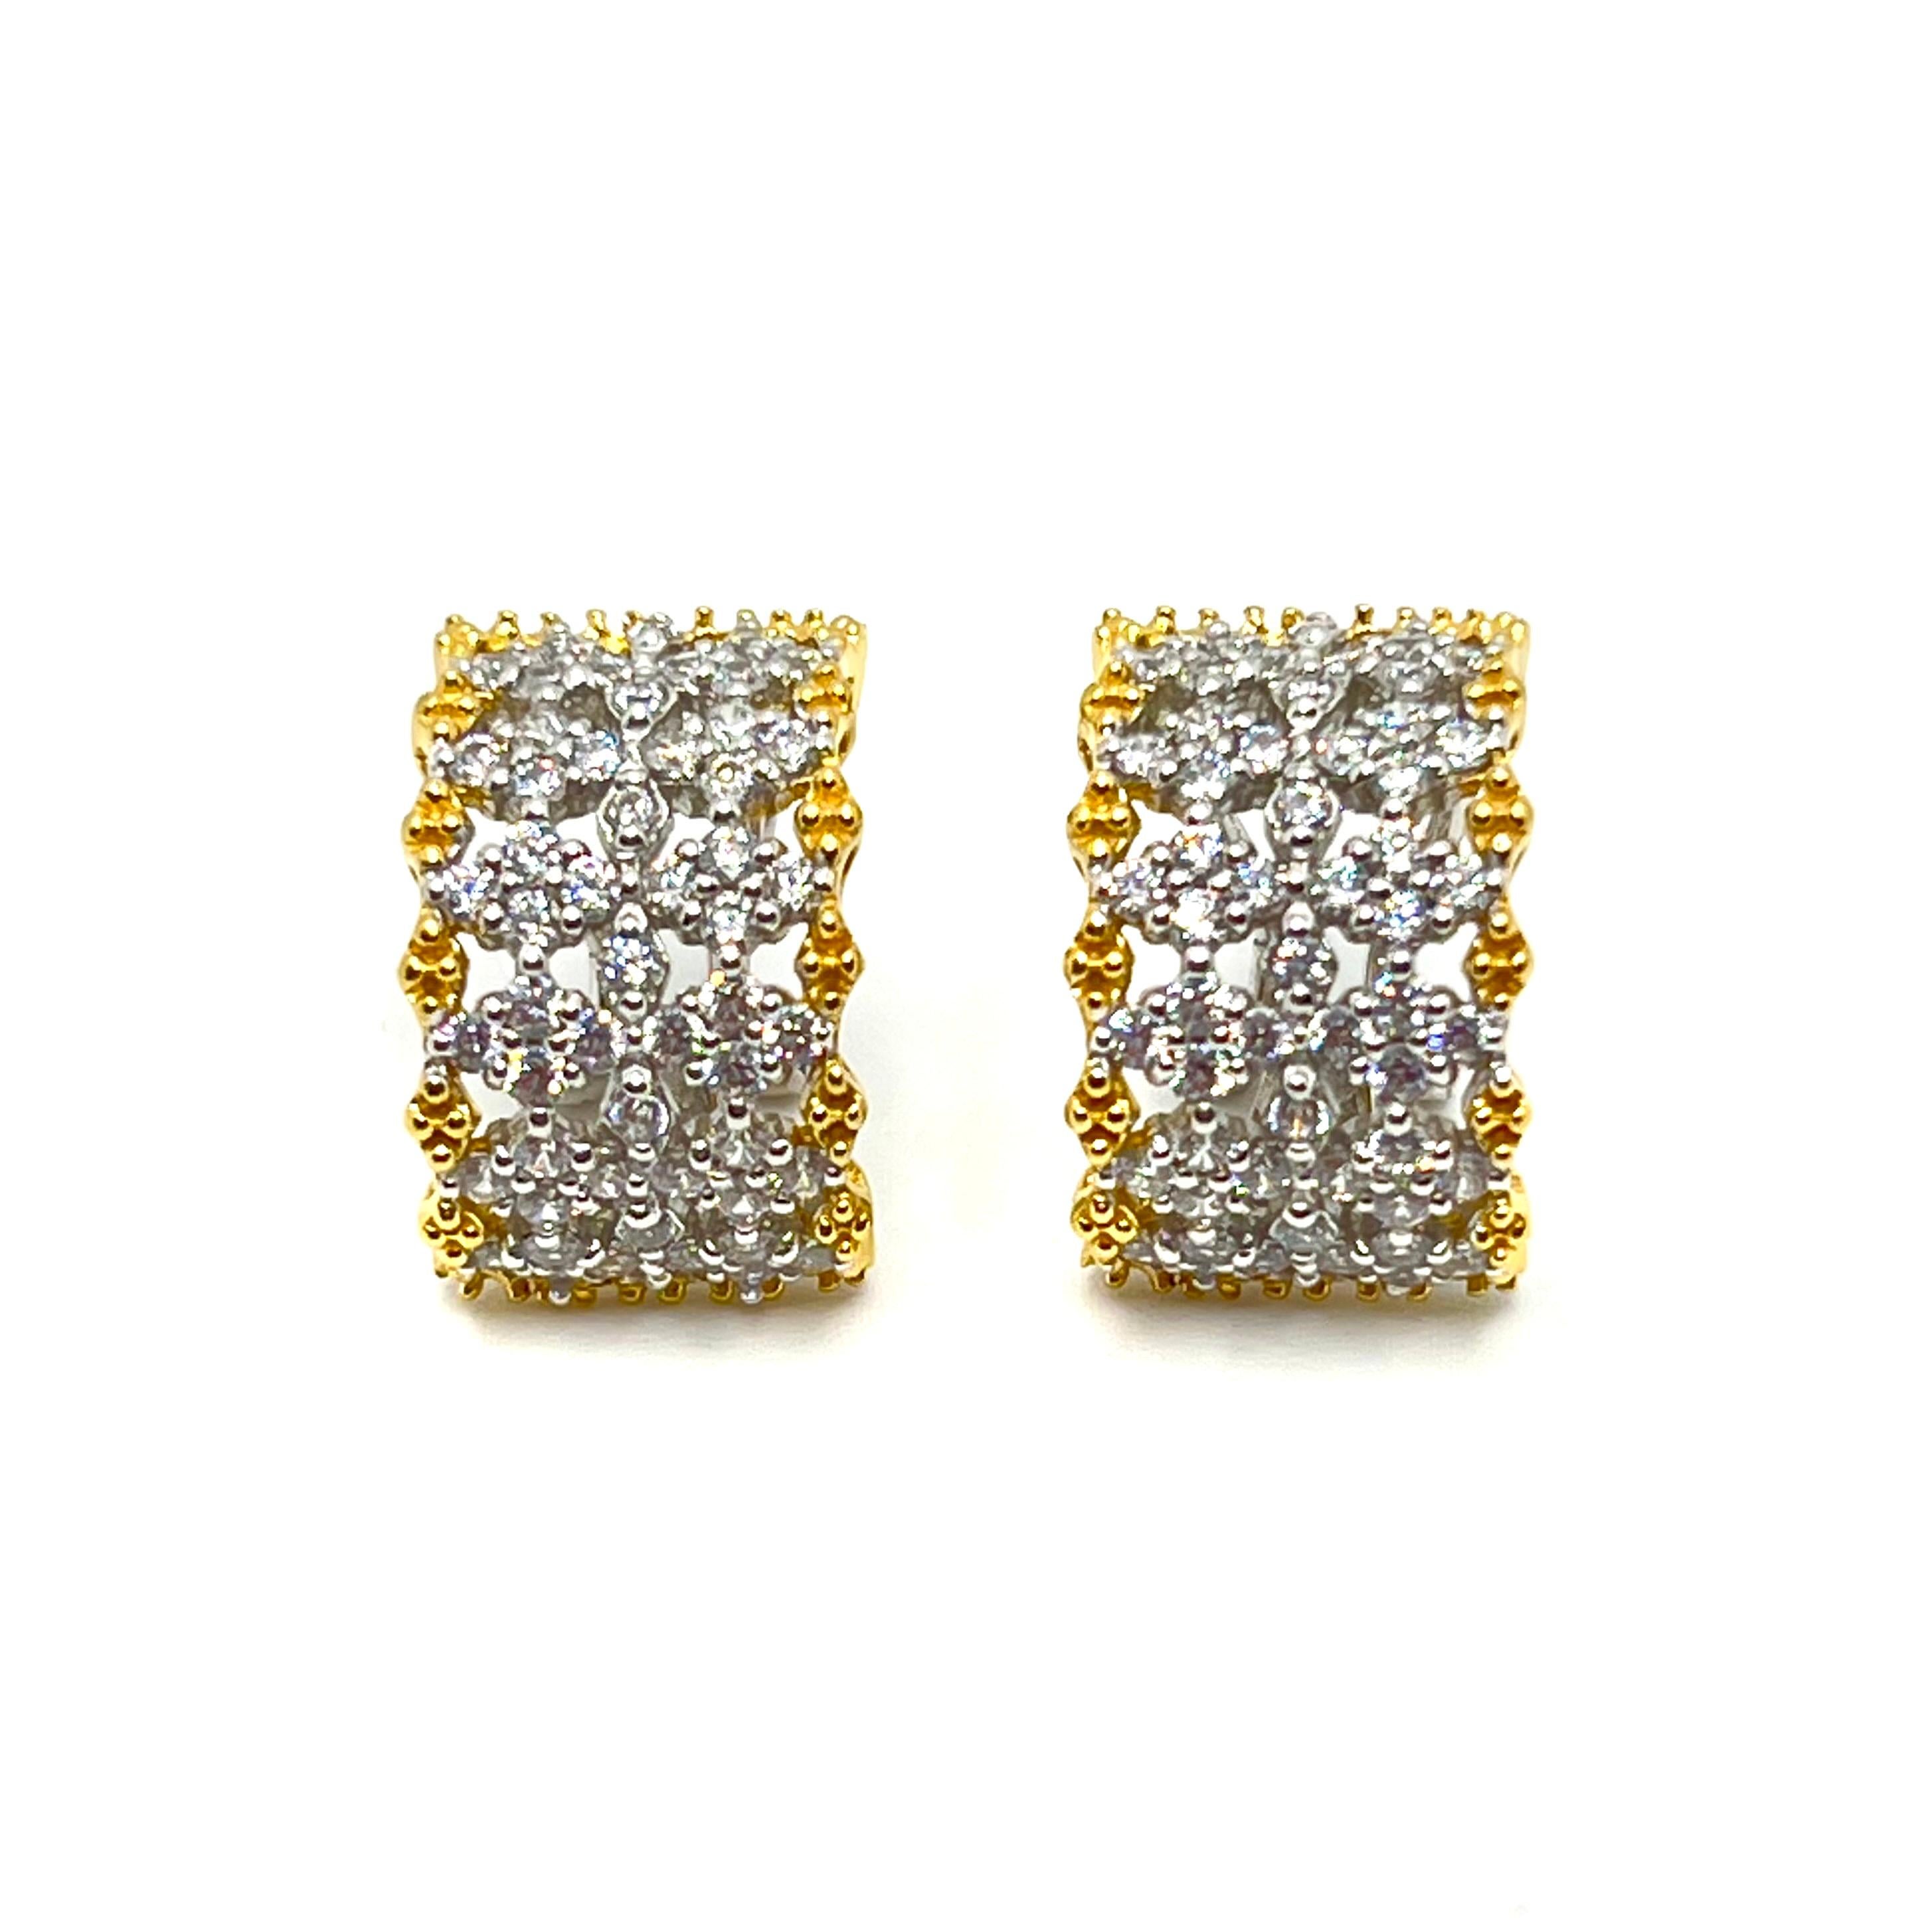 Stunning Bijoux Num Diamond-Pattern Half Hoop Vermeil Earrings

These fabulous earrings feature 108pcs of round simulated diamonds (AAA quality) handset in two-tone platinum rhodium and 18k yellow gold vermeil over sterling silver, small beads on